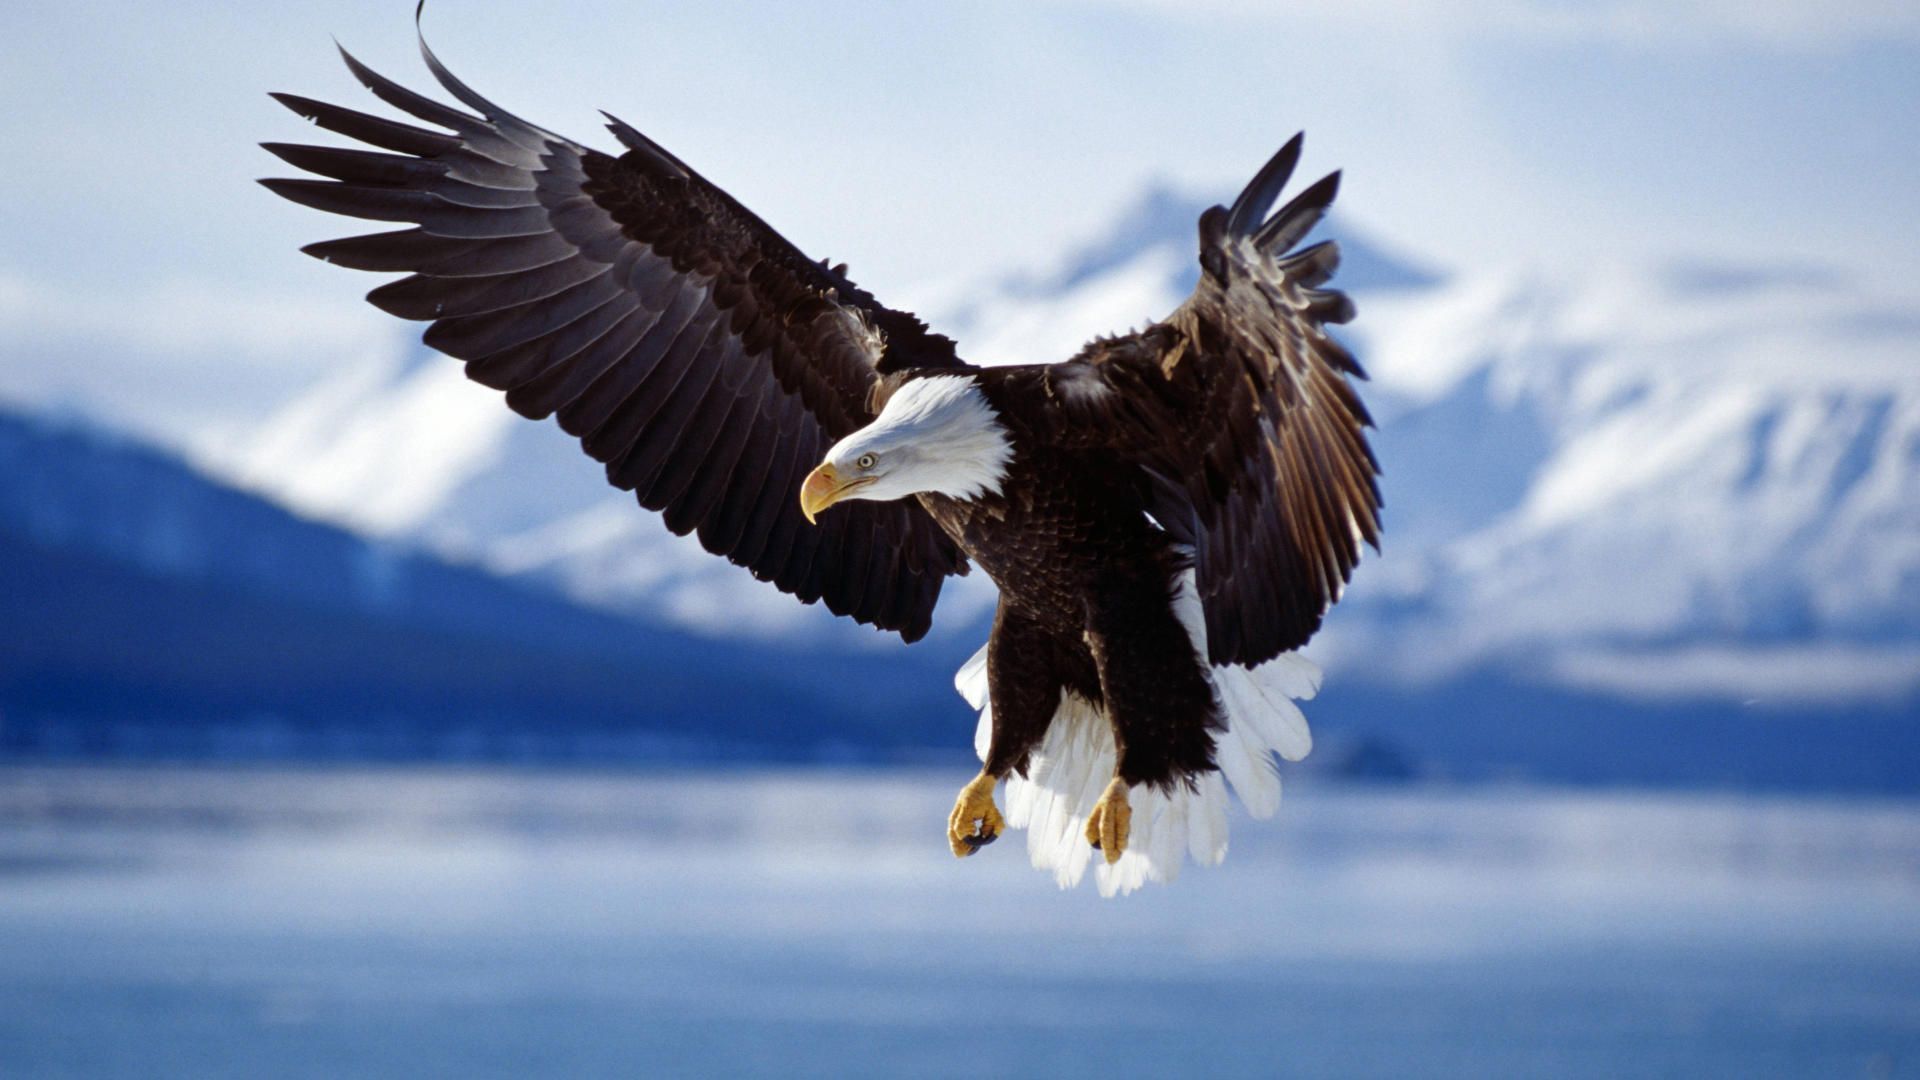 Cool Eagle Background Dowload Wallpaper